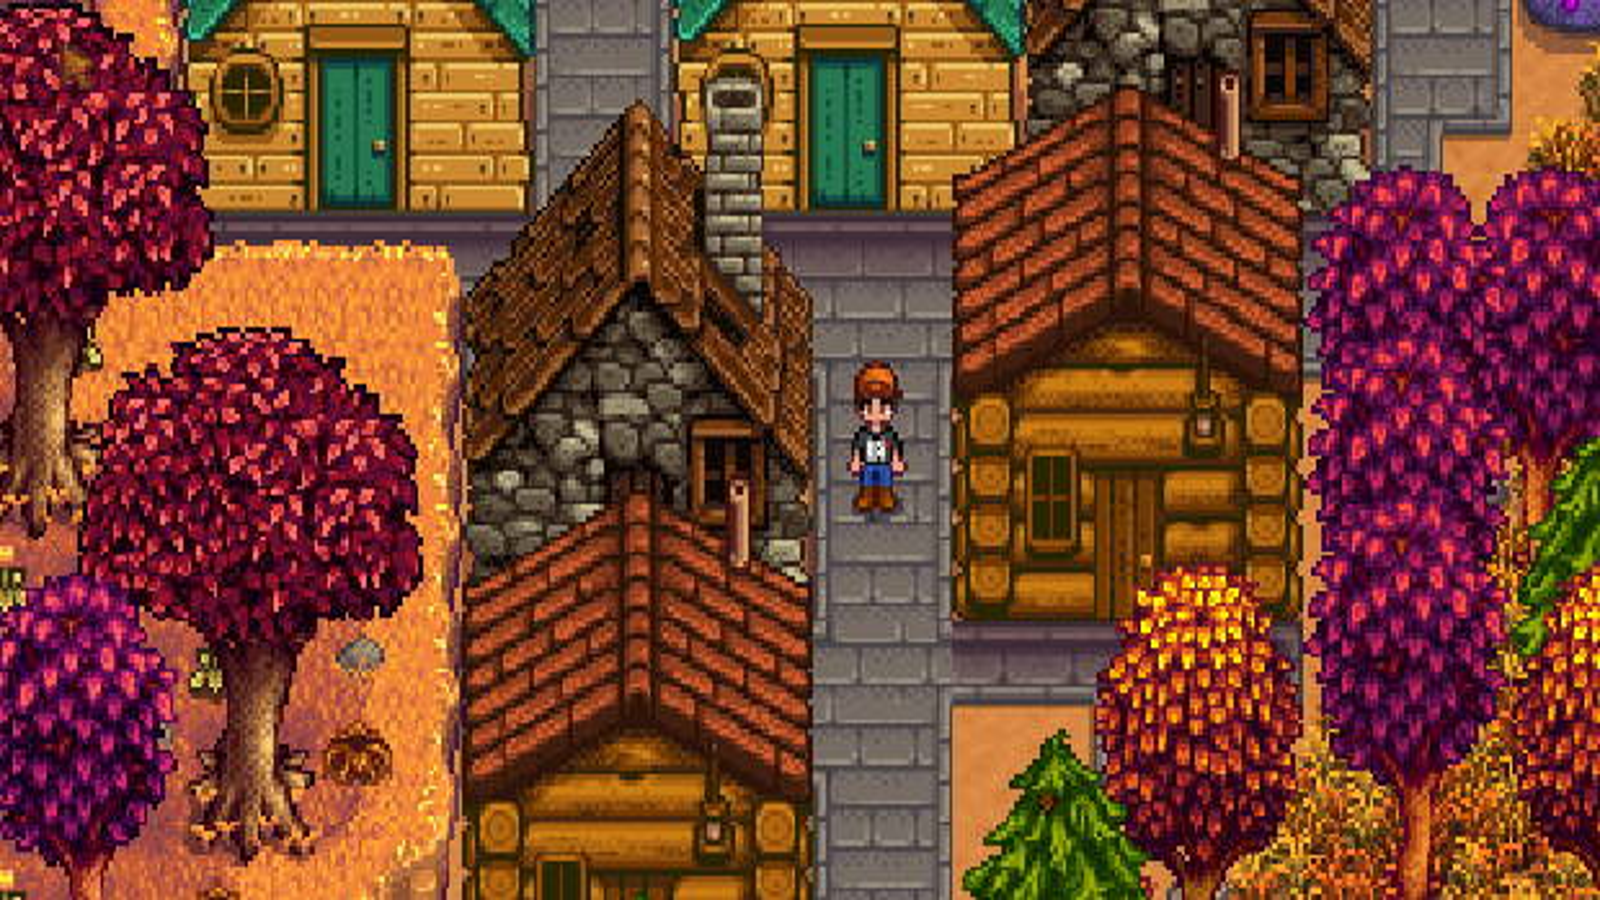 Stardew Valley Multiplayer Beta Delayed To Make Room for Polish and QA